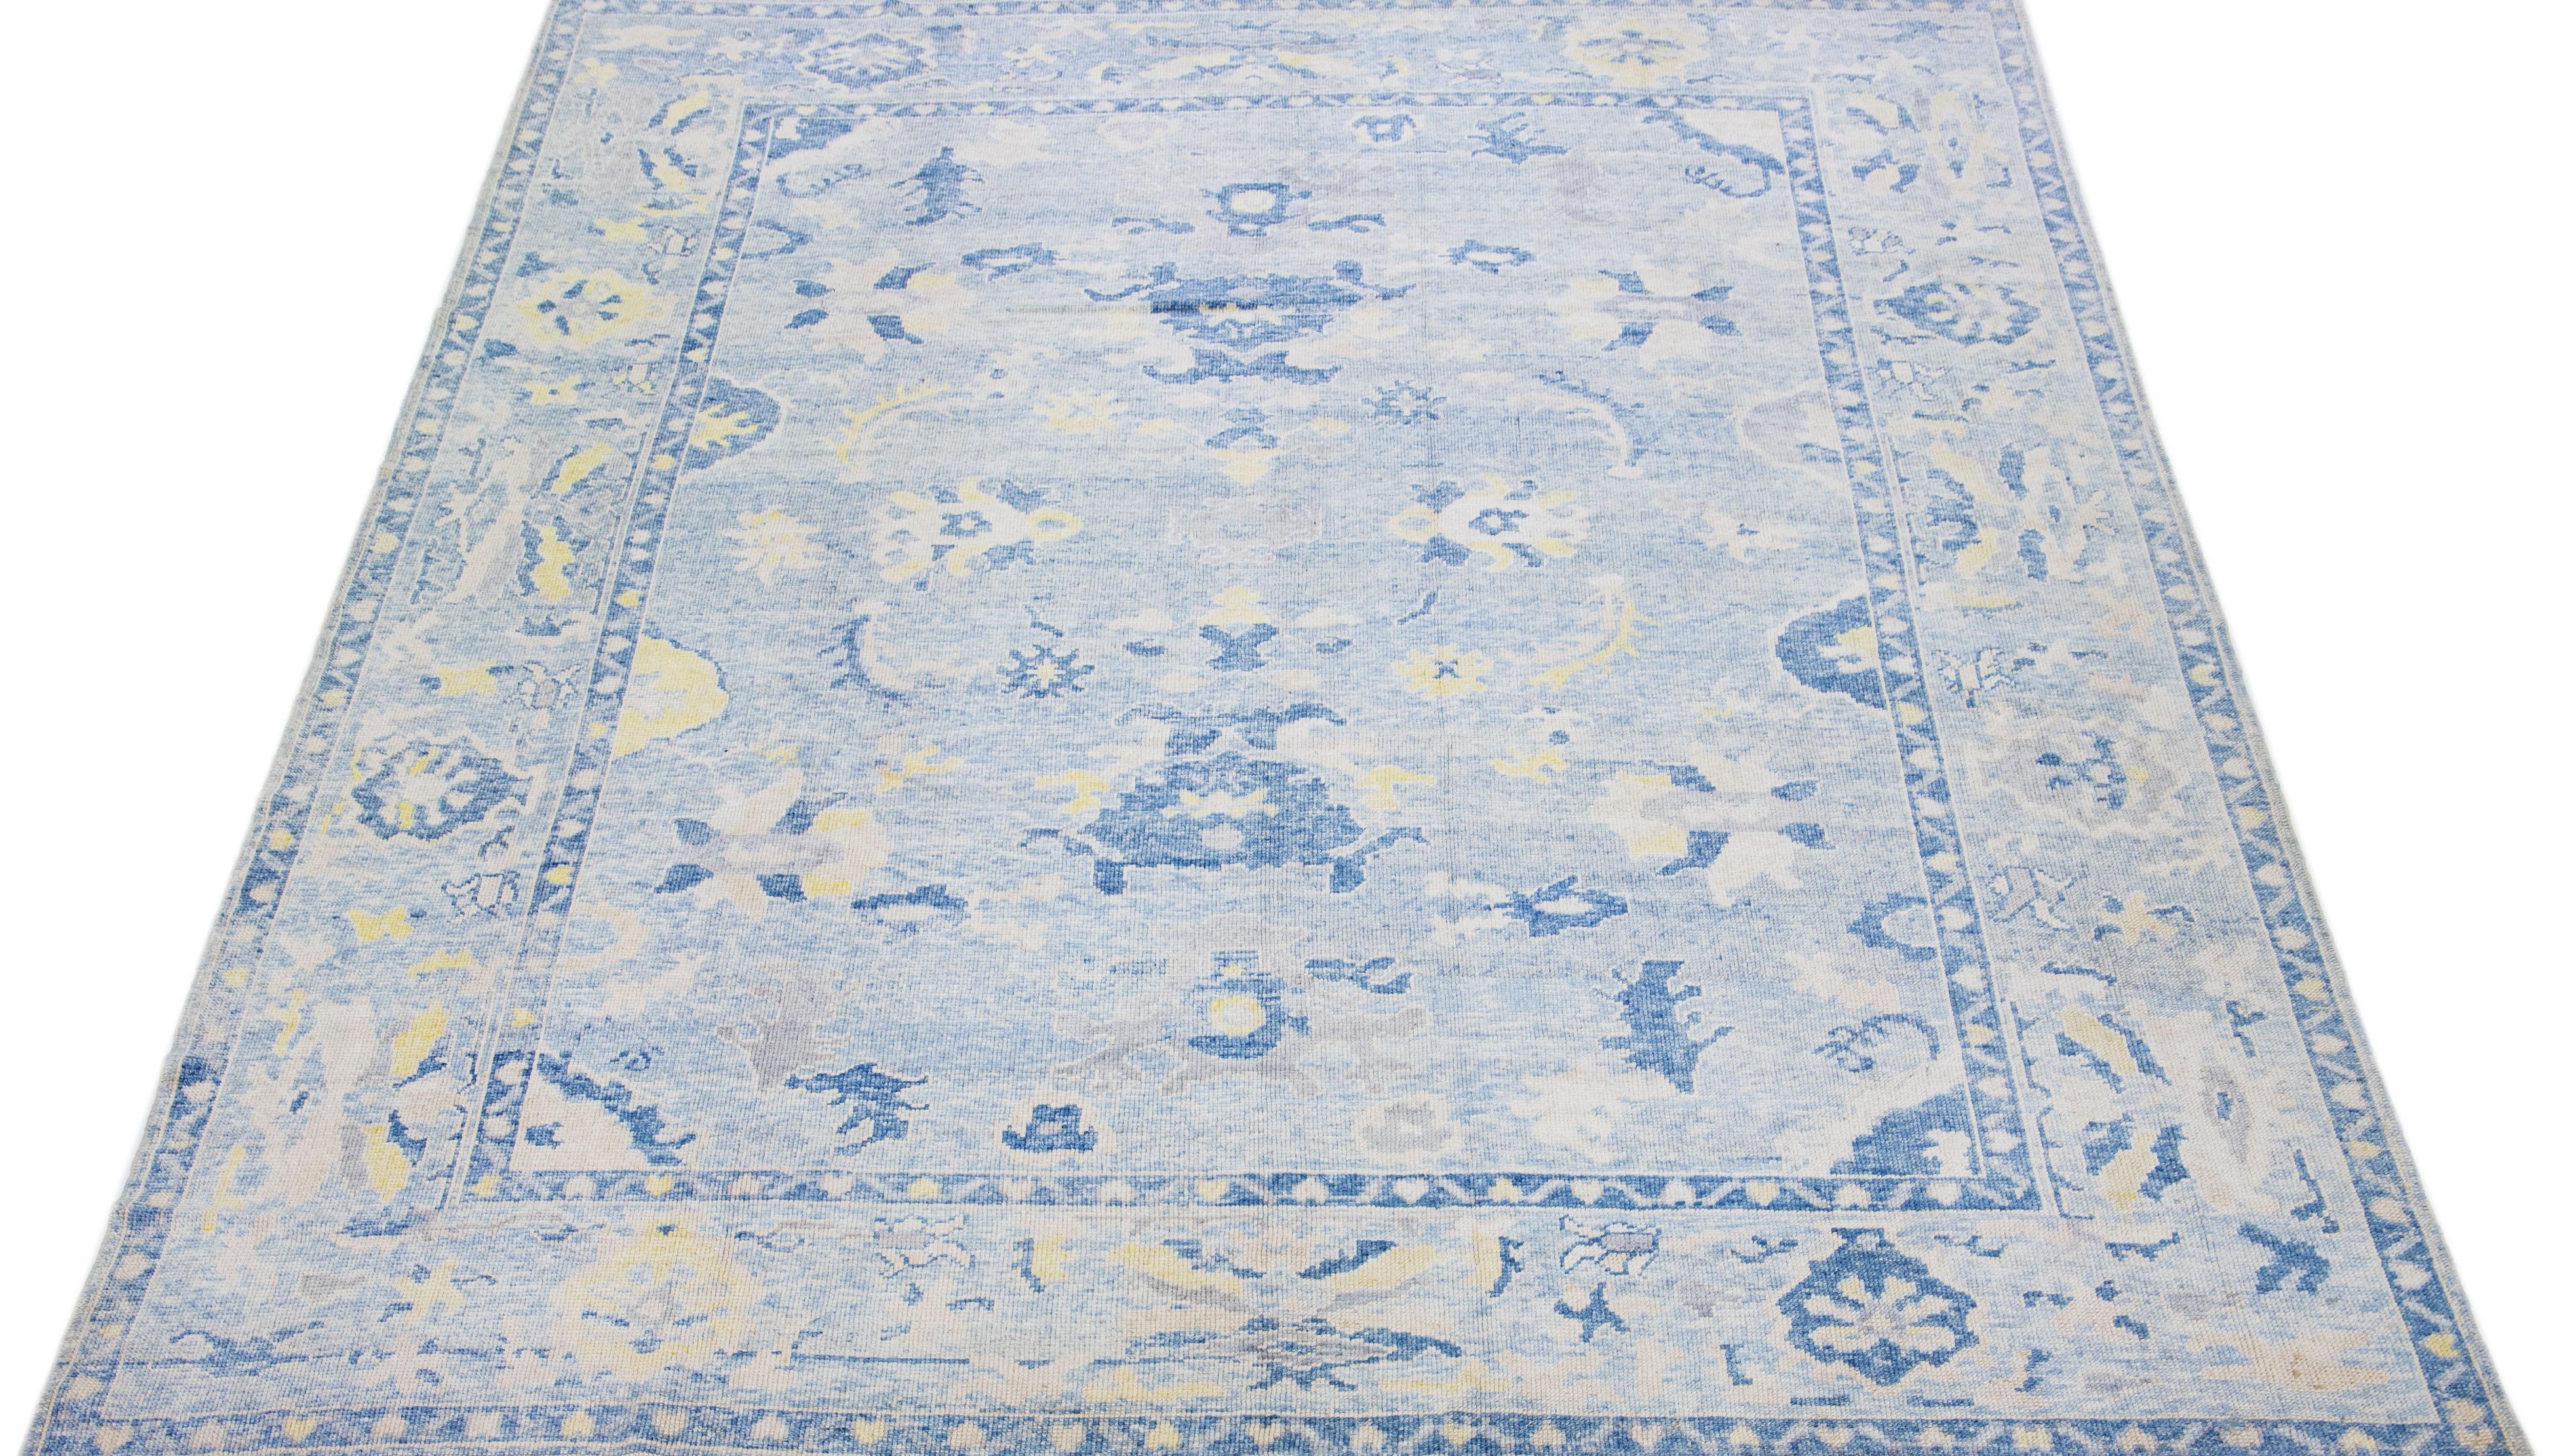 Beautiful modern Oushak hand-knotted wool rug with a blue color field. This Turkish Piece has beige, gray, and yellow accent colors in a gorgeous all-over floral design.

This rug measures: 9'9